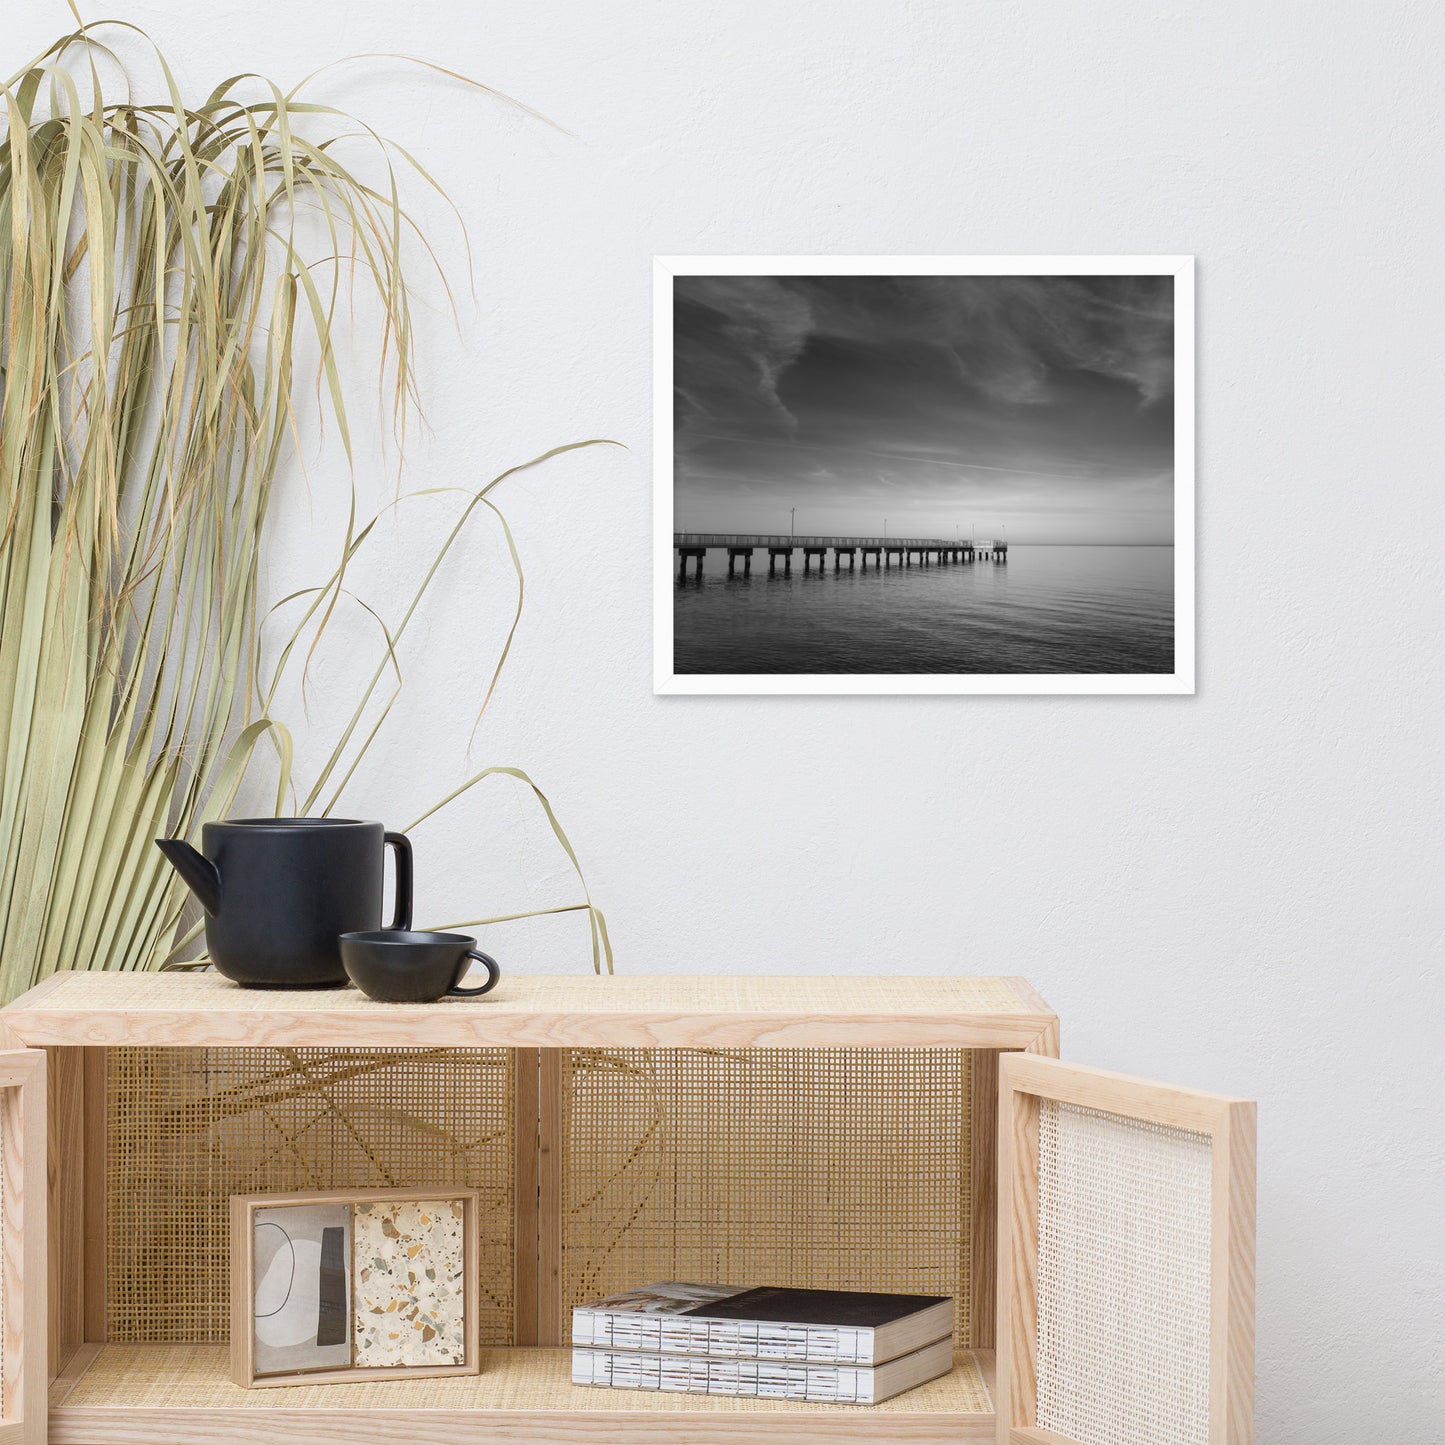 End of the Pier Black and White Framed Photo Wall Art Prints